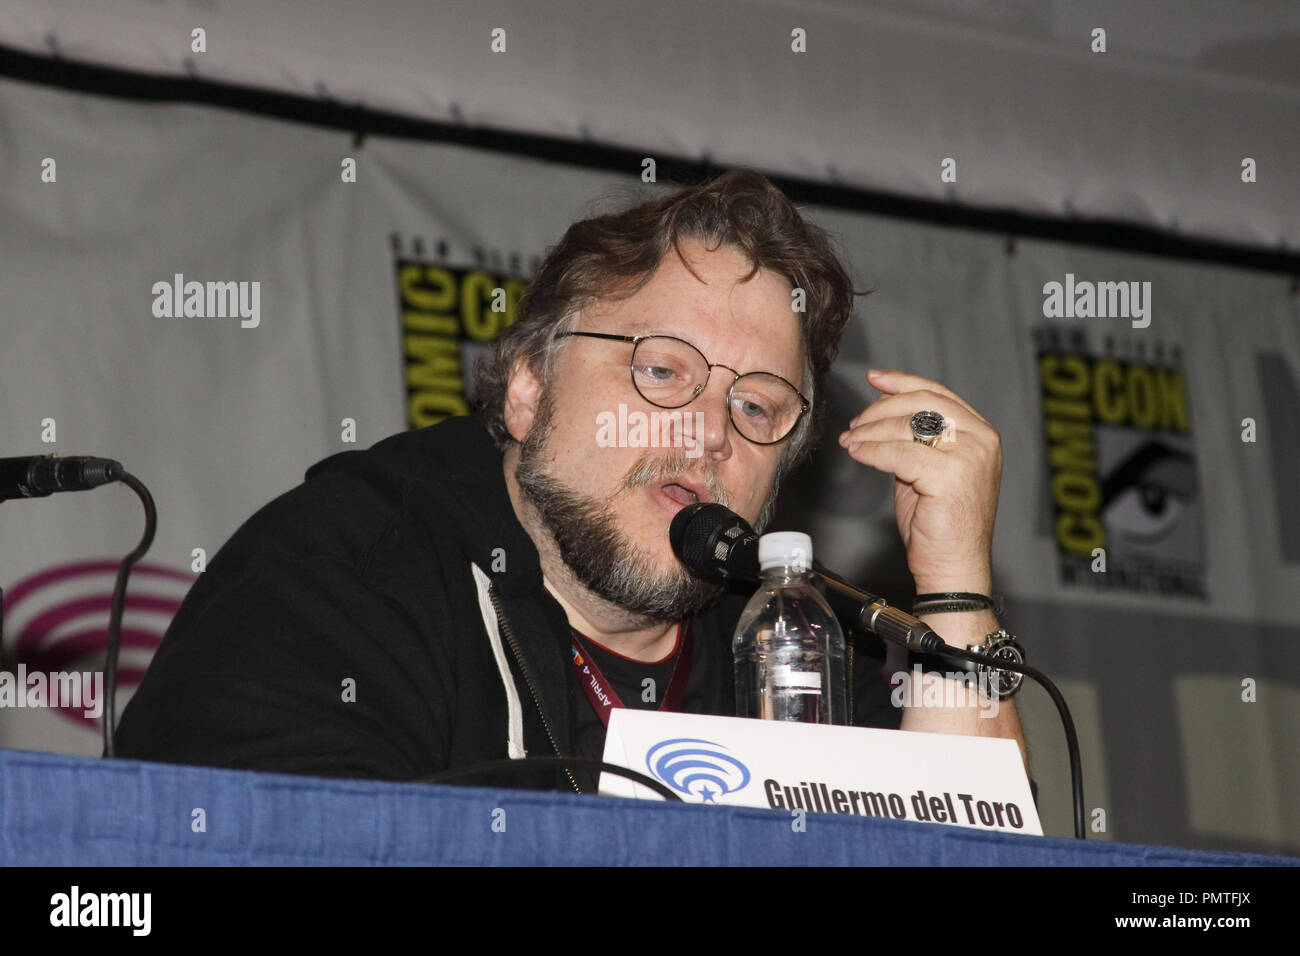 Guillermo del Toro at day 2 of WonderCon Anaheim. Pacific Rim Panel held at the Anaheim Convention Center in Anaheim, CA, March 30, 2013. Photo by: Richard Chavez / PictureLux  File Reference # 31908 035RAC  For Editorial Use Only -  All Rights Reserved Stock Photo